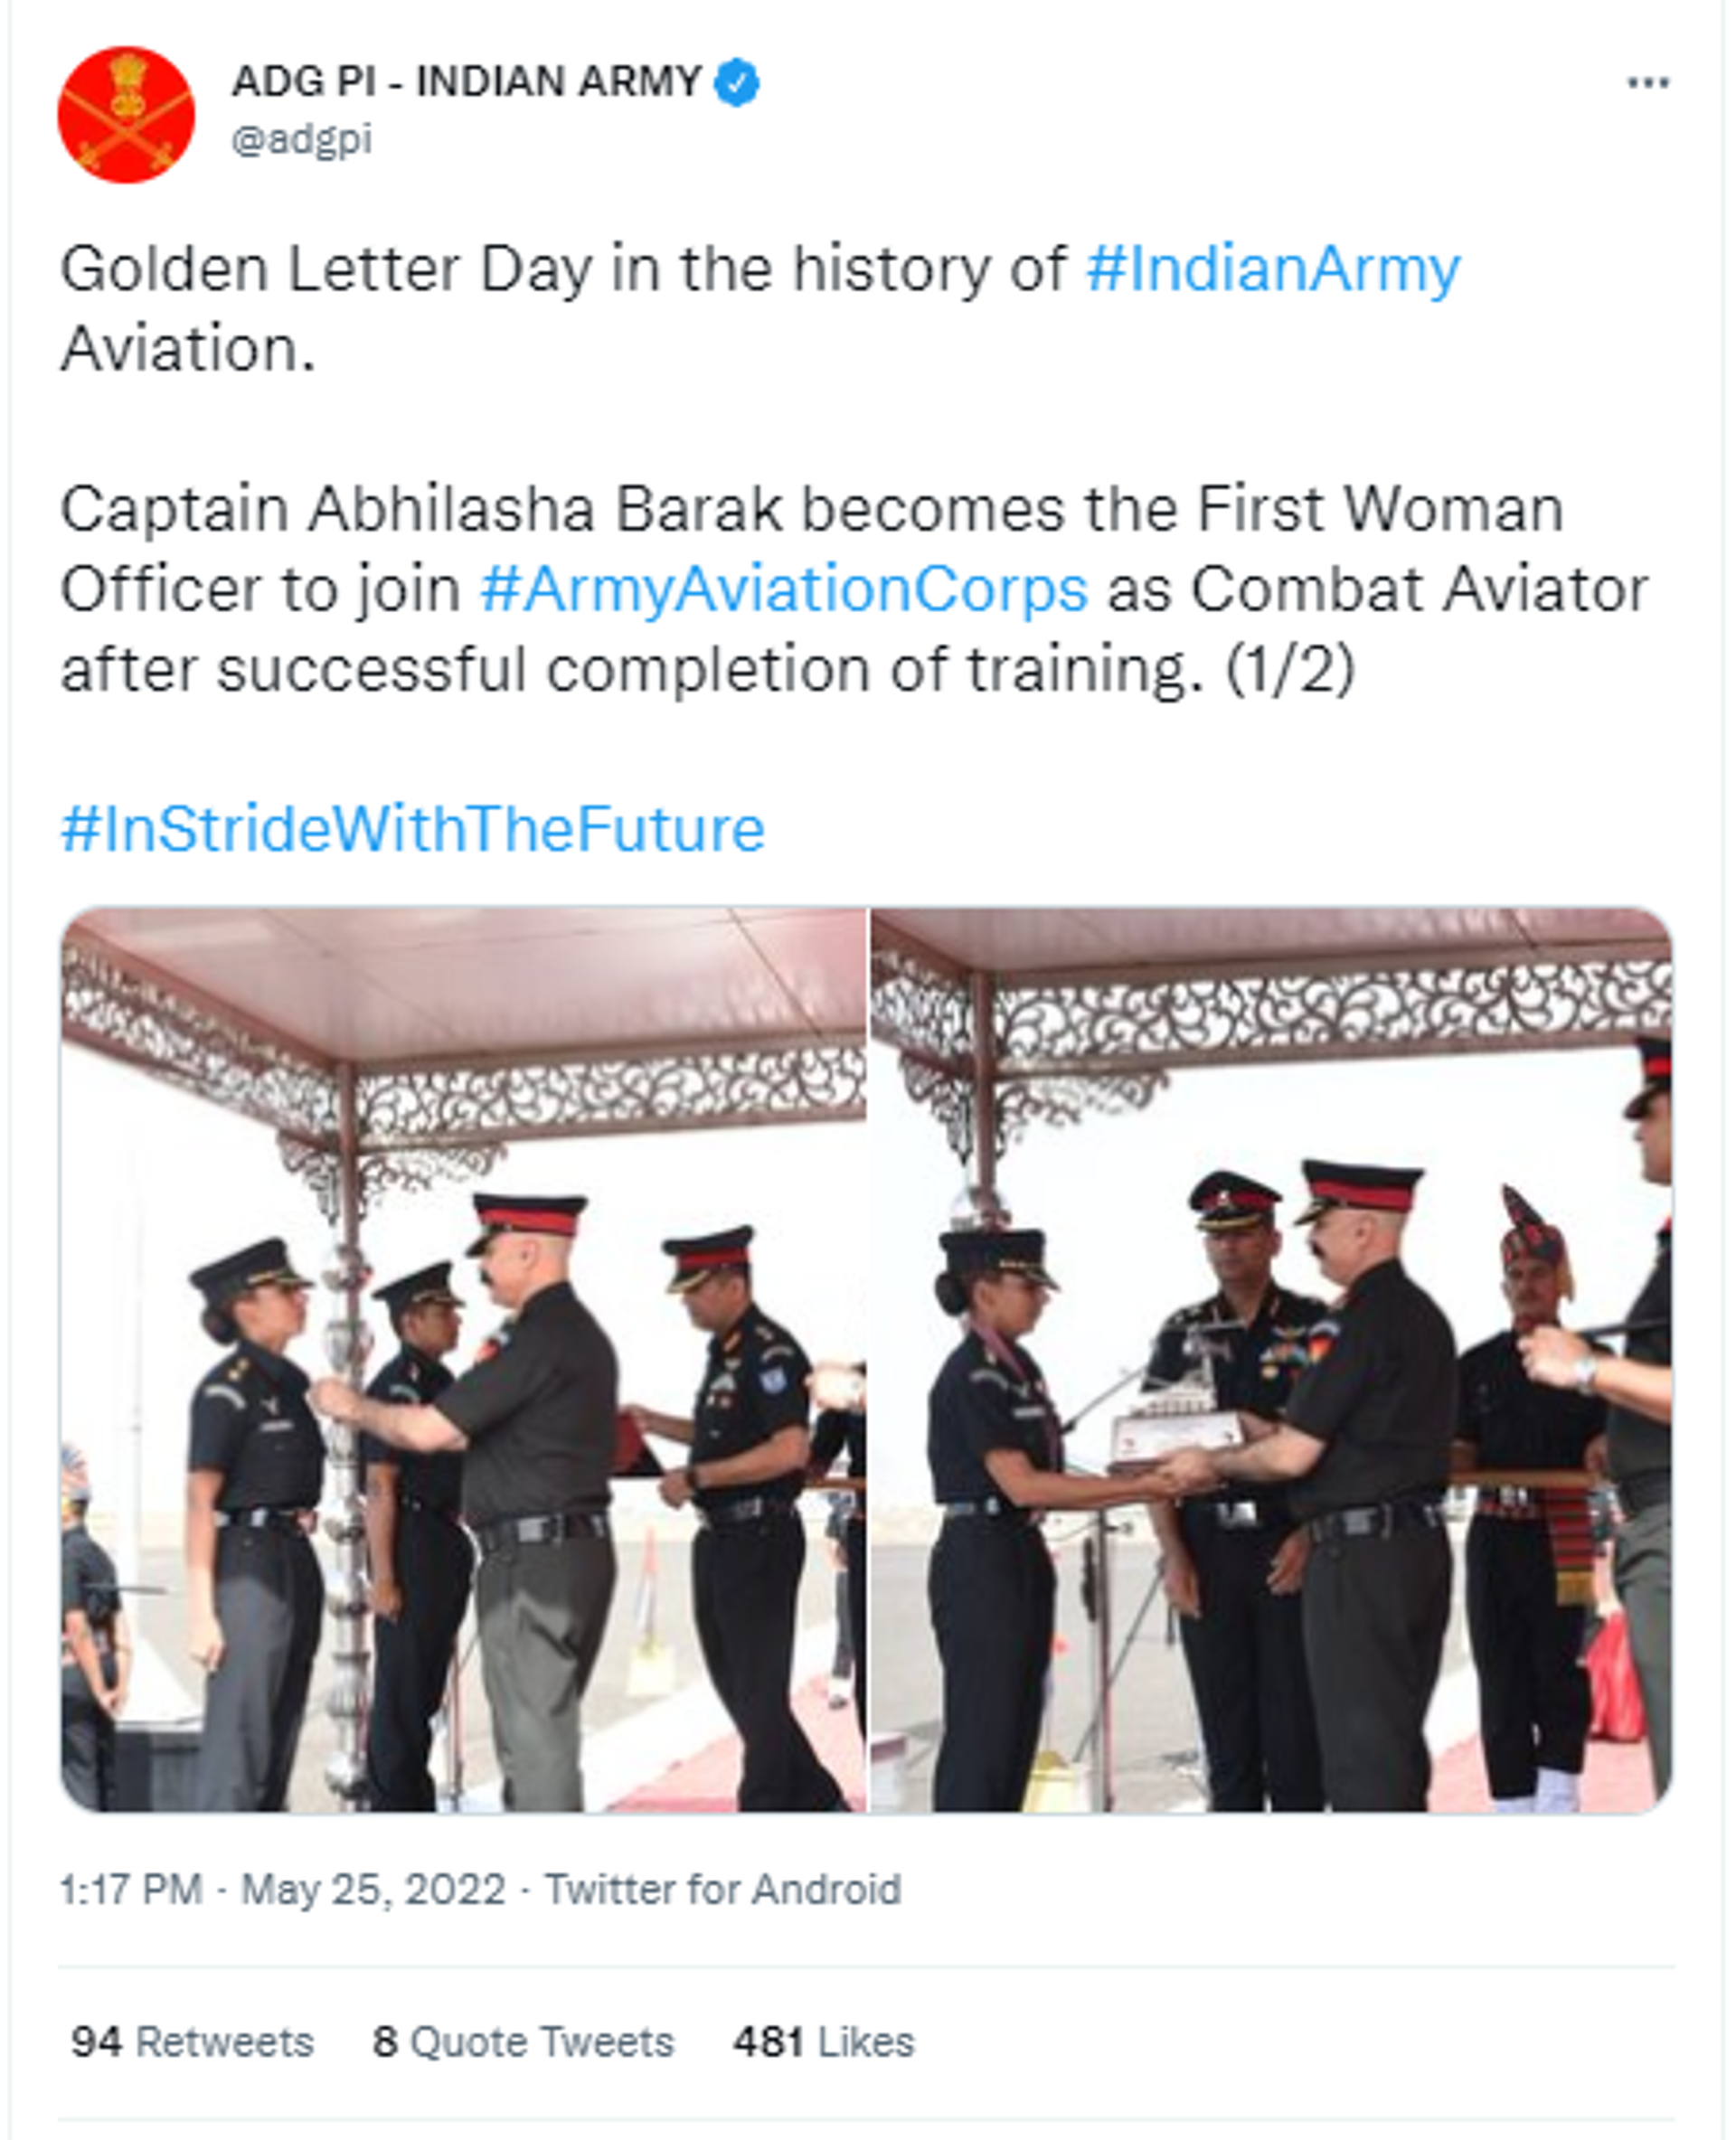 Captain Abhilasha Barak Becomes First Woman Officer to Join Indian Army Aviation Corps  - Sputnik International, 1920, 25.05.2022